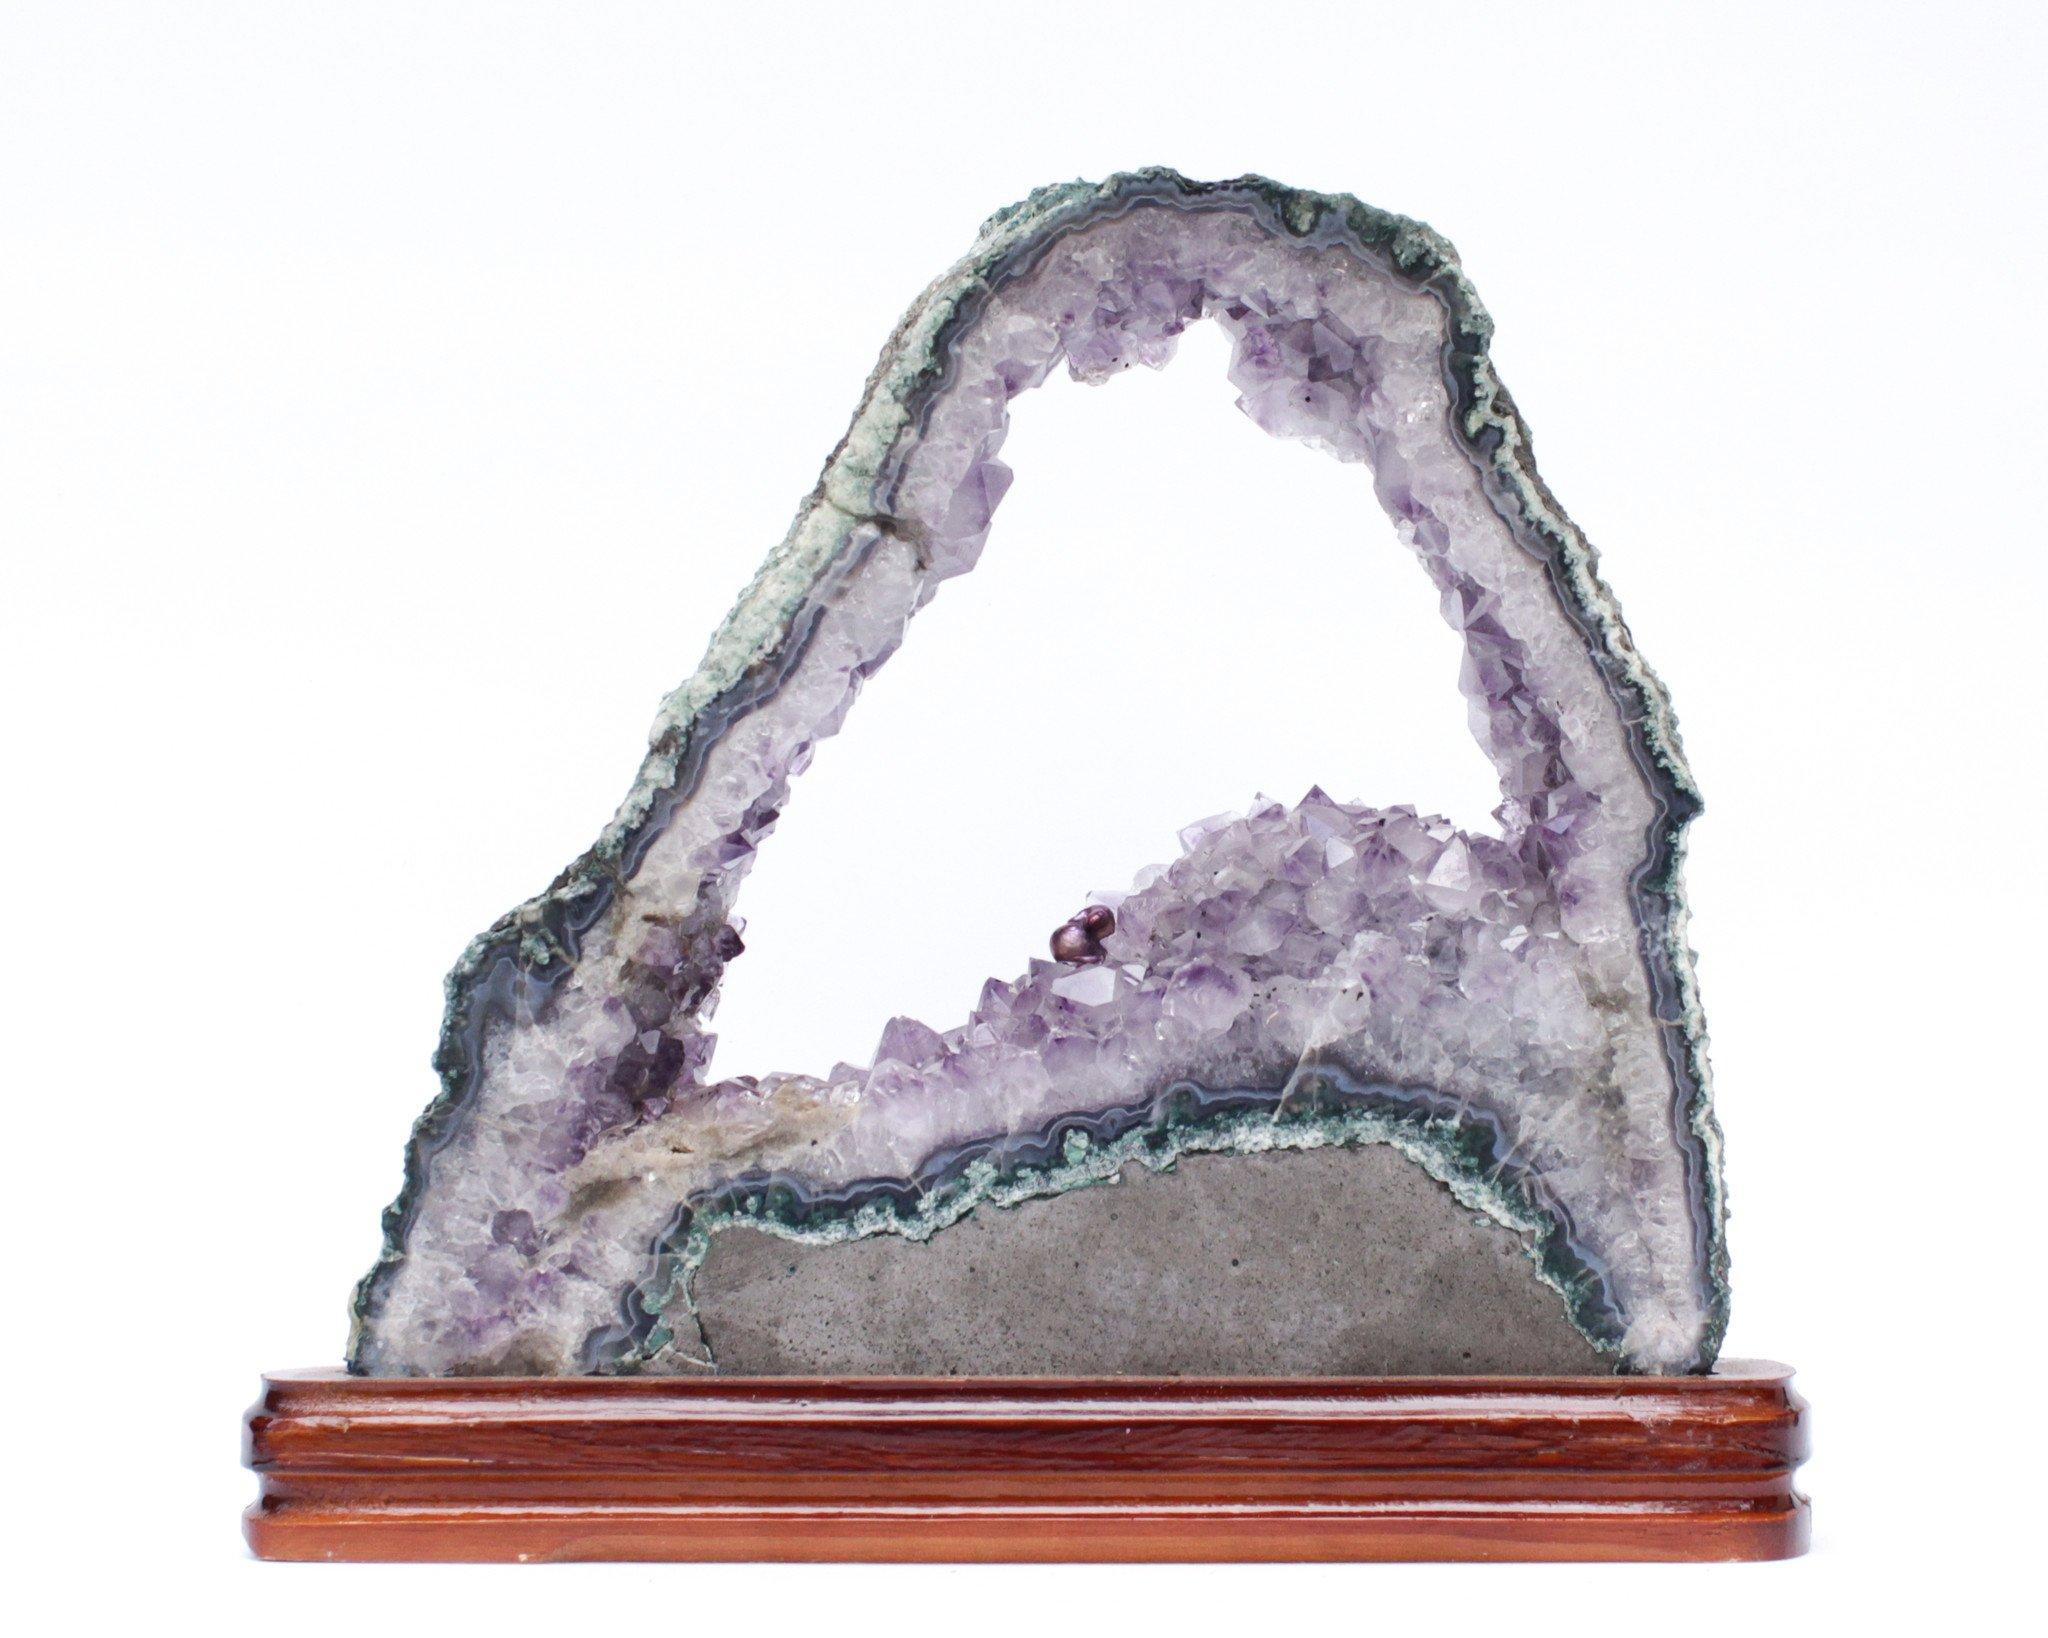 Amethyst slice with a baroque natural forming pearl on a polished wood base.

This amethyst is rare in how large it is, its beautiful shape, and its large opening in the center. The piece originally comes from Brazil. It is adorned with a baroque